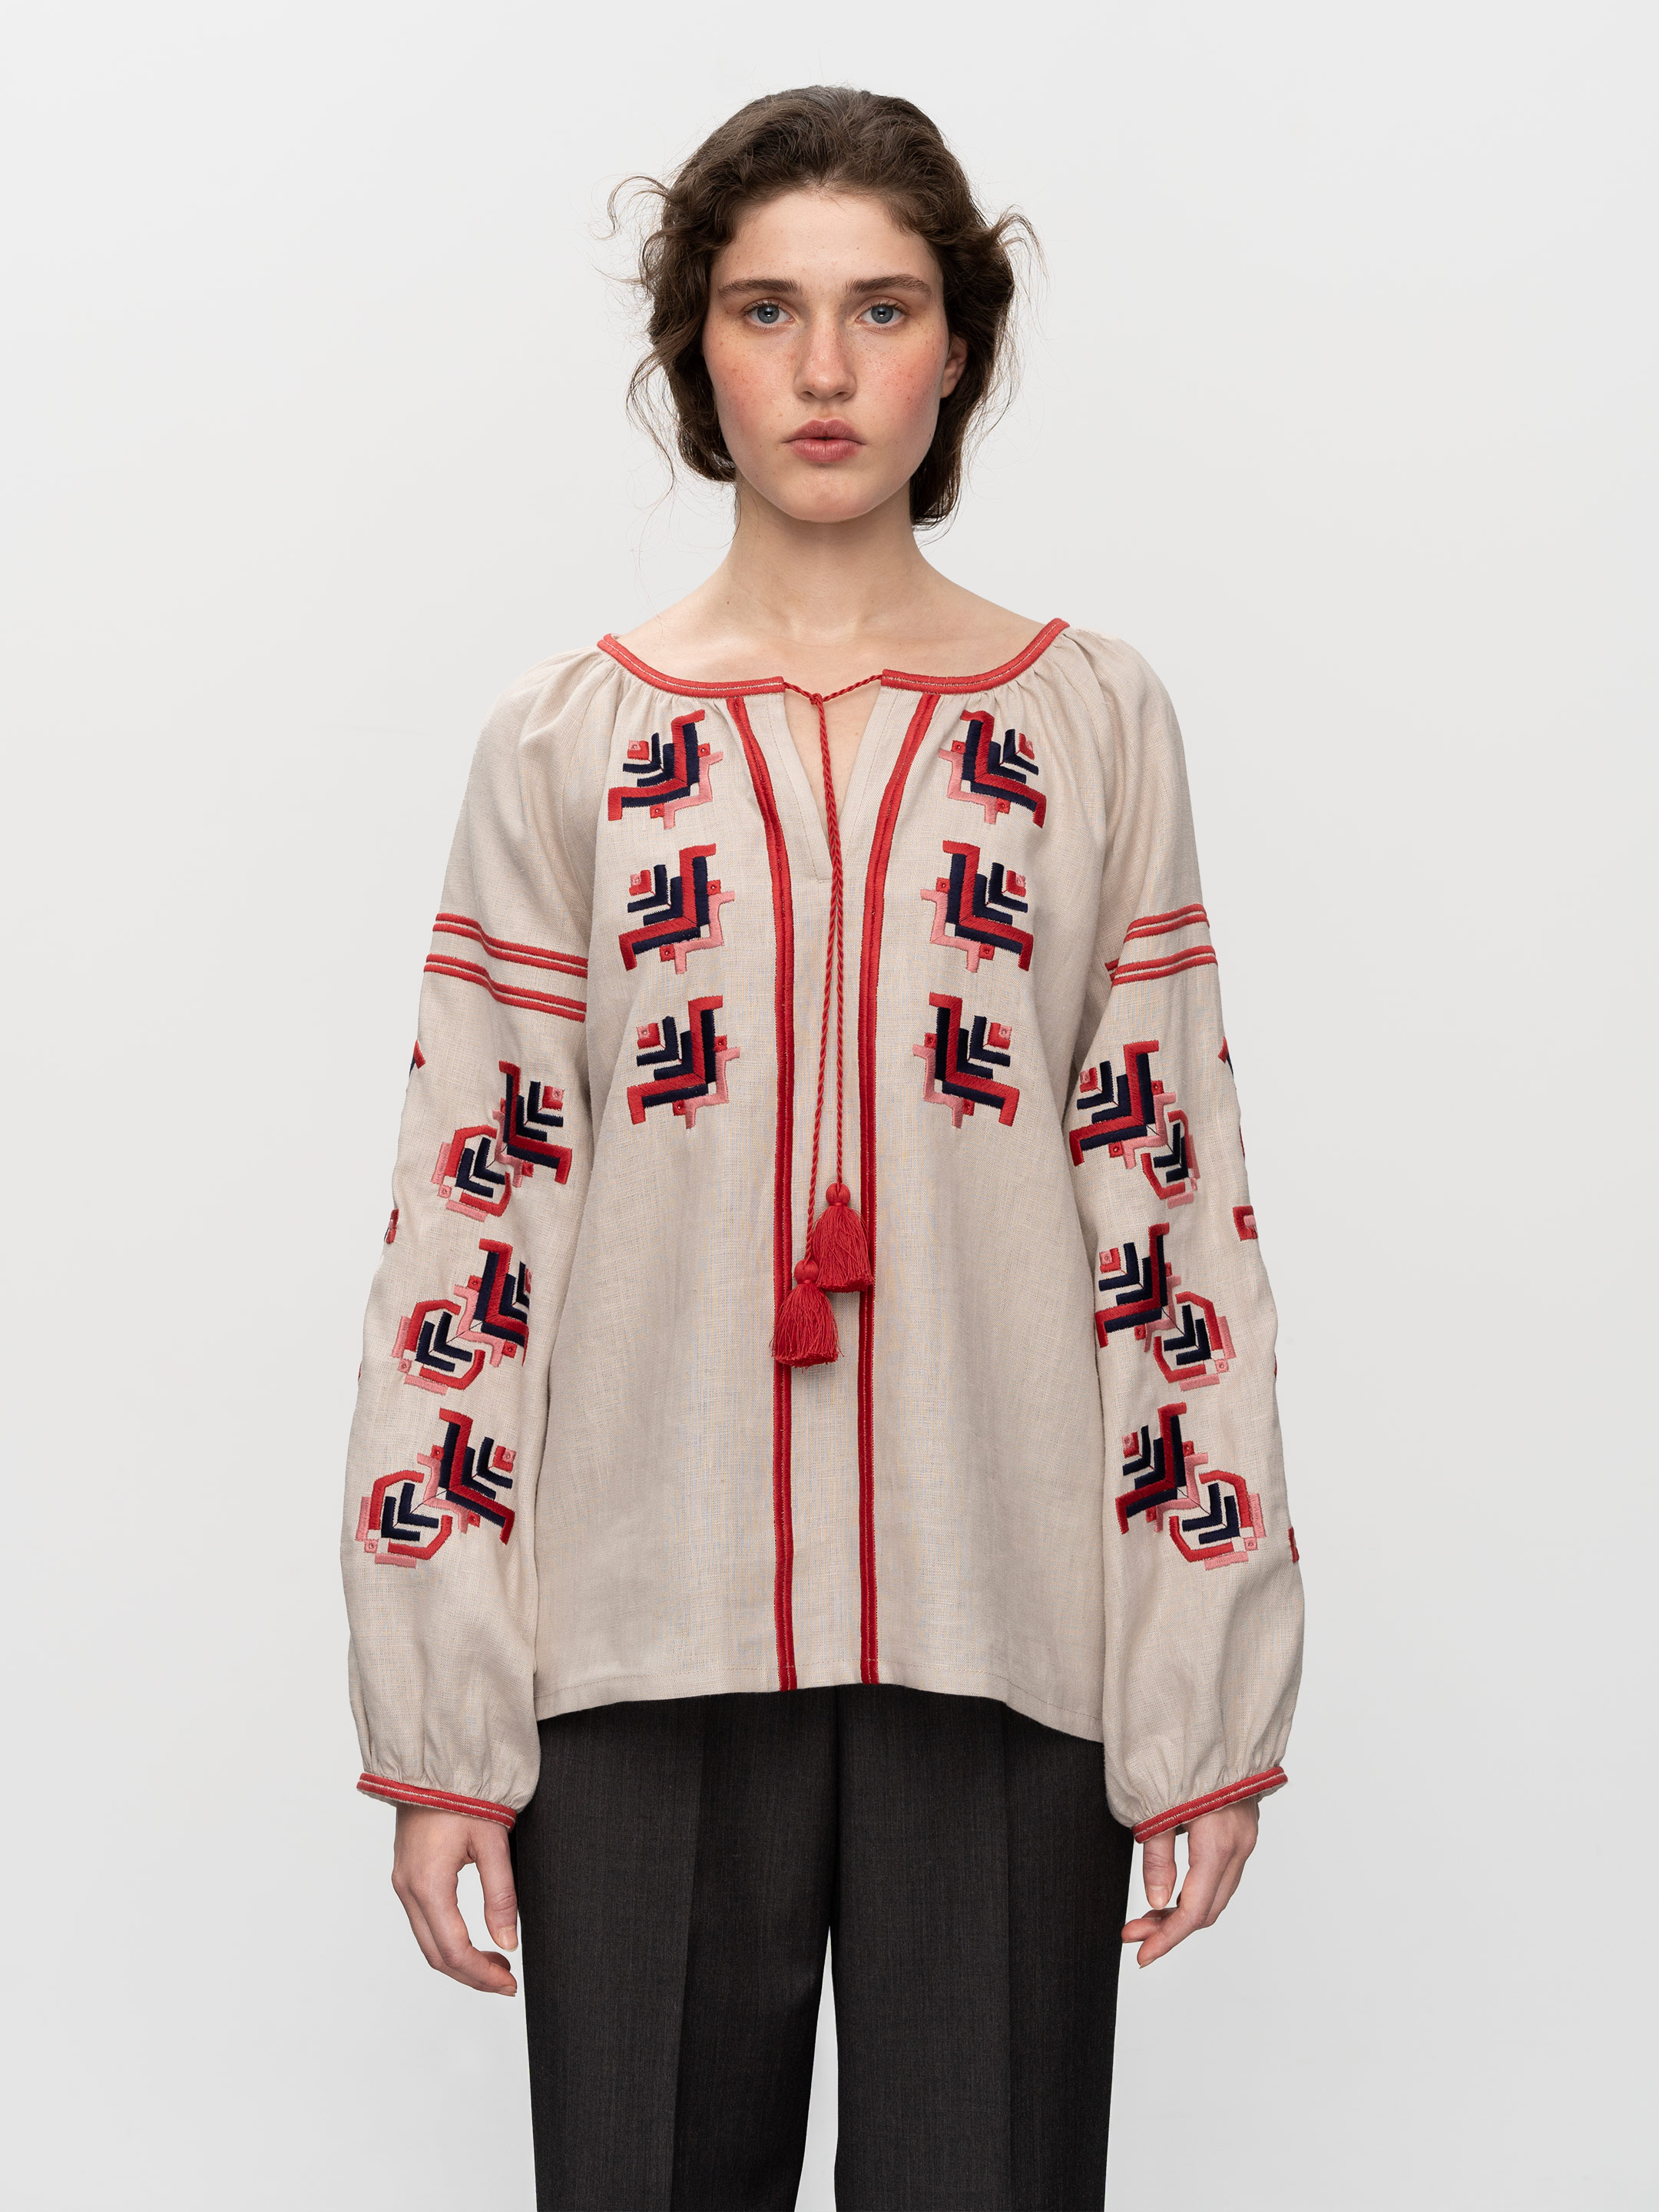 Women's embroidered shirt with floral ornament Maky - photo 1